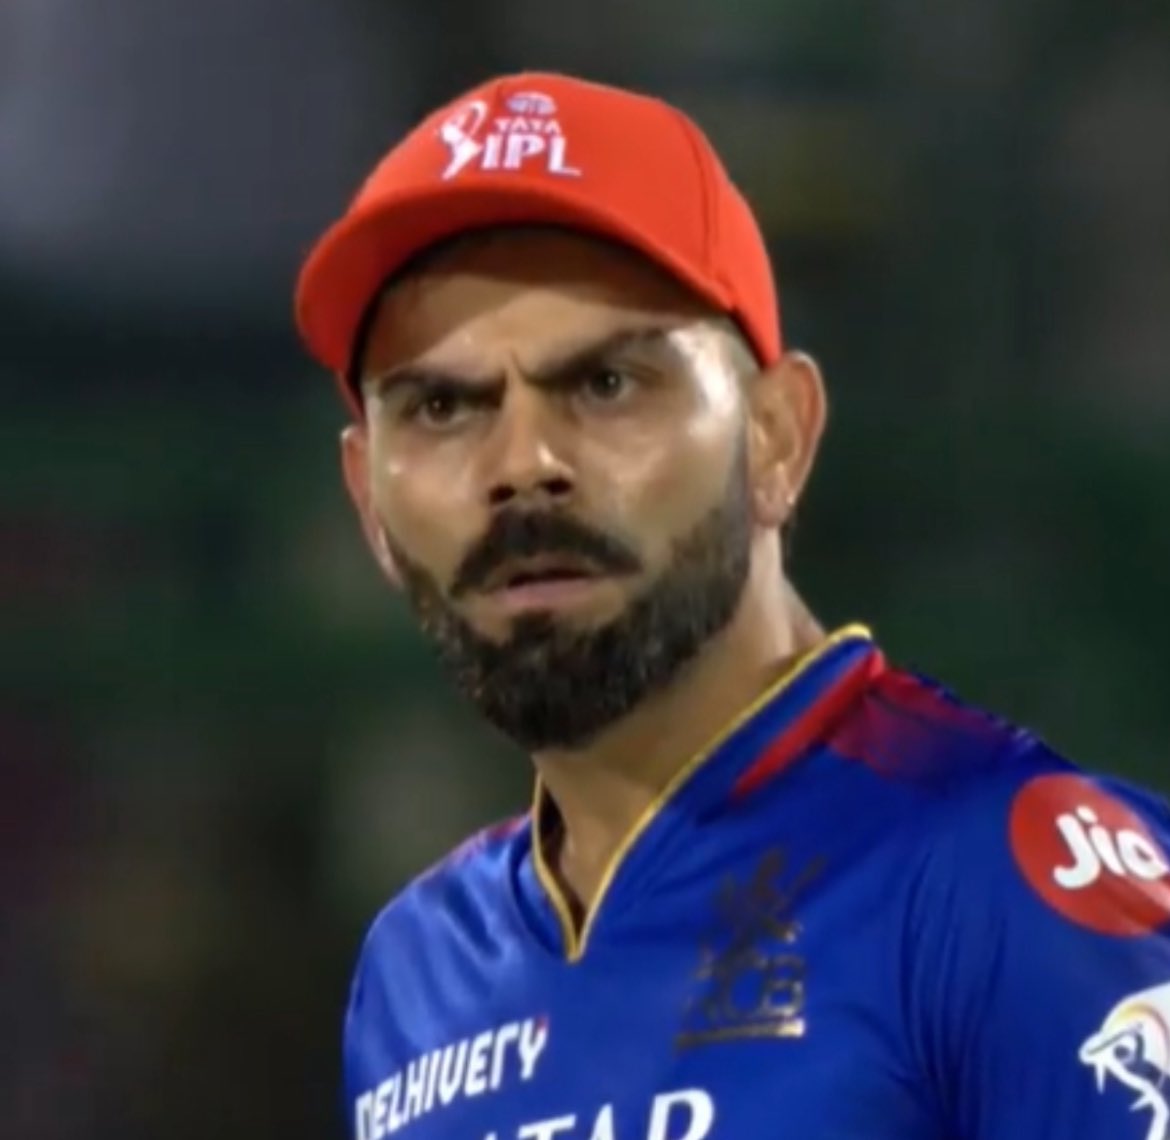 Kohli, After seeing Pakistan’s preparations for T20 World Cup. 🤣 #RRvsRCB